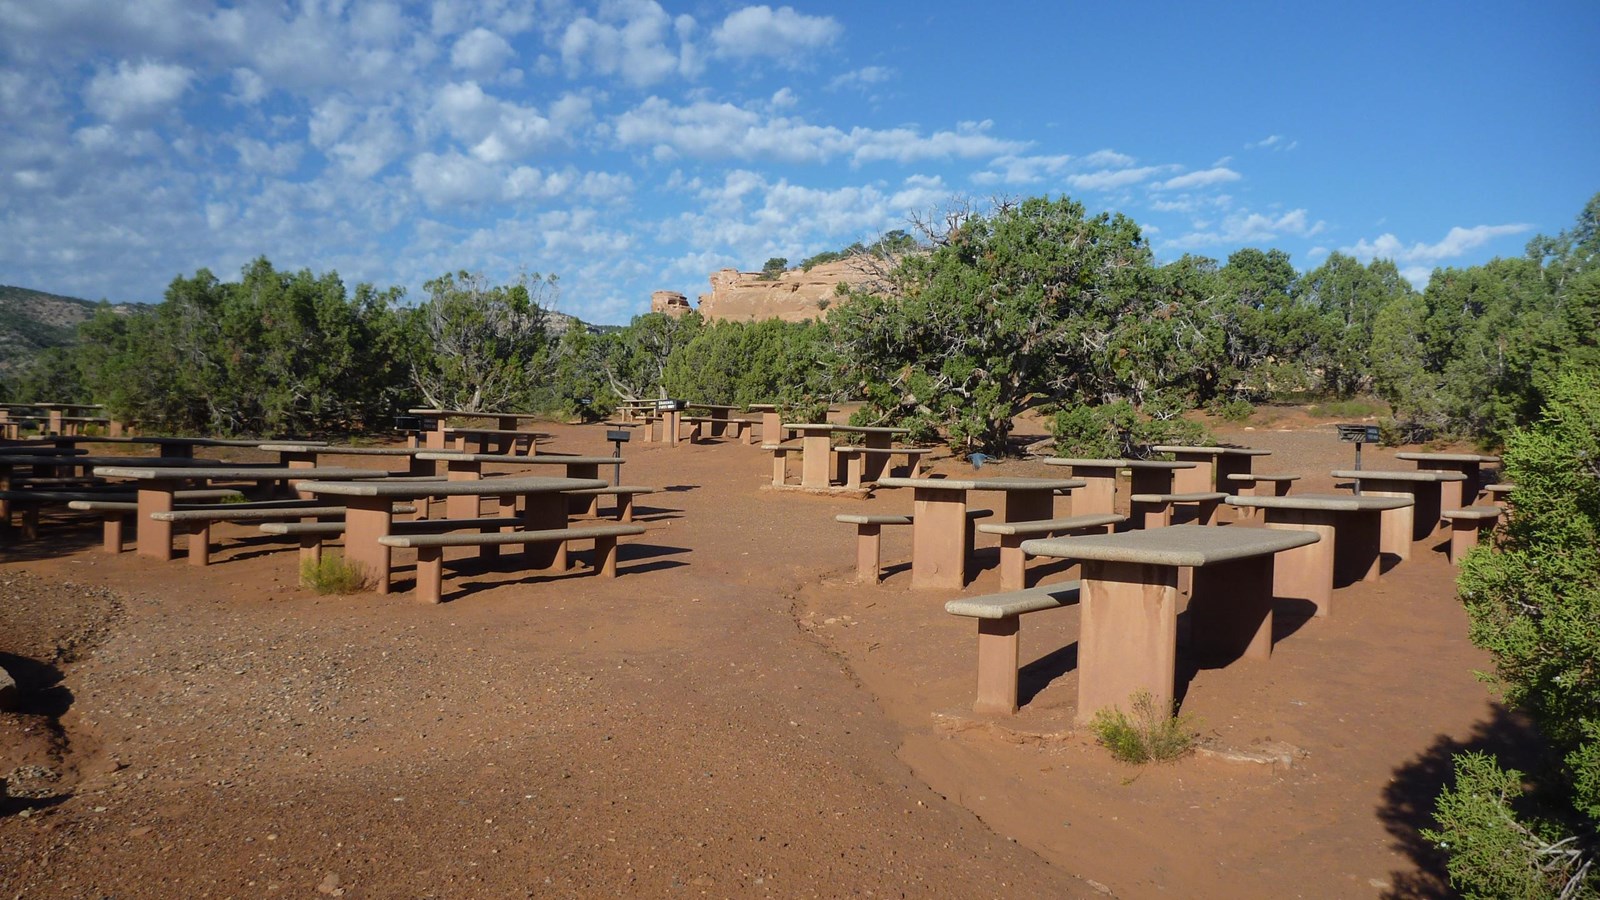 Cement picnic tables with benches are interspersed on rusty colored sand, among green desert trees.